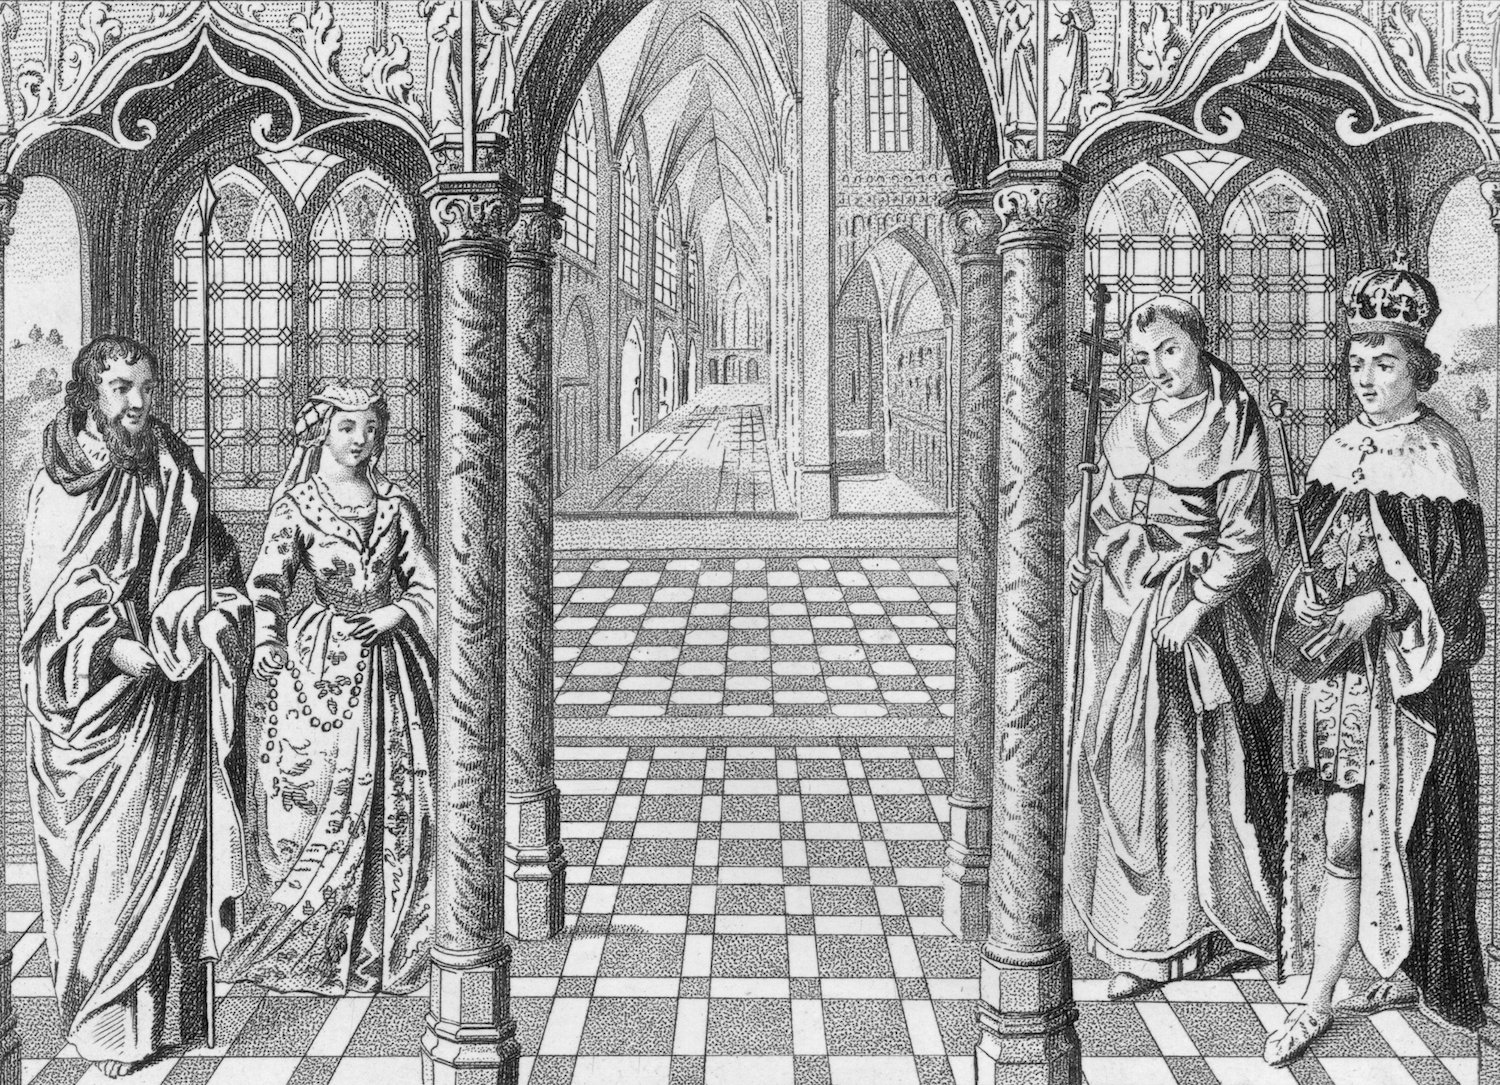 Marriage of Henry VII (1457 - 1509), the first Tudor King of England, to Elizabeth of York (1465 - 1503)